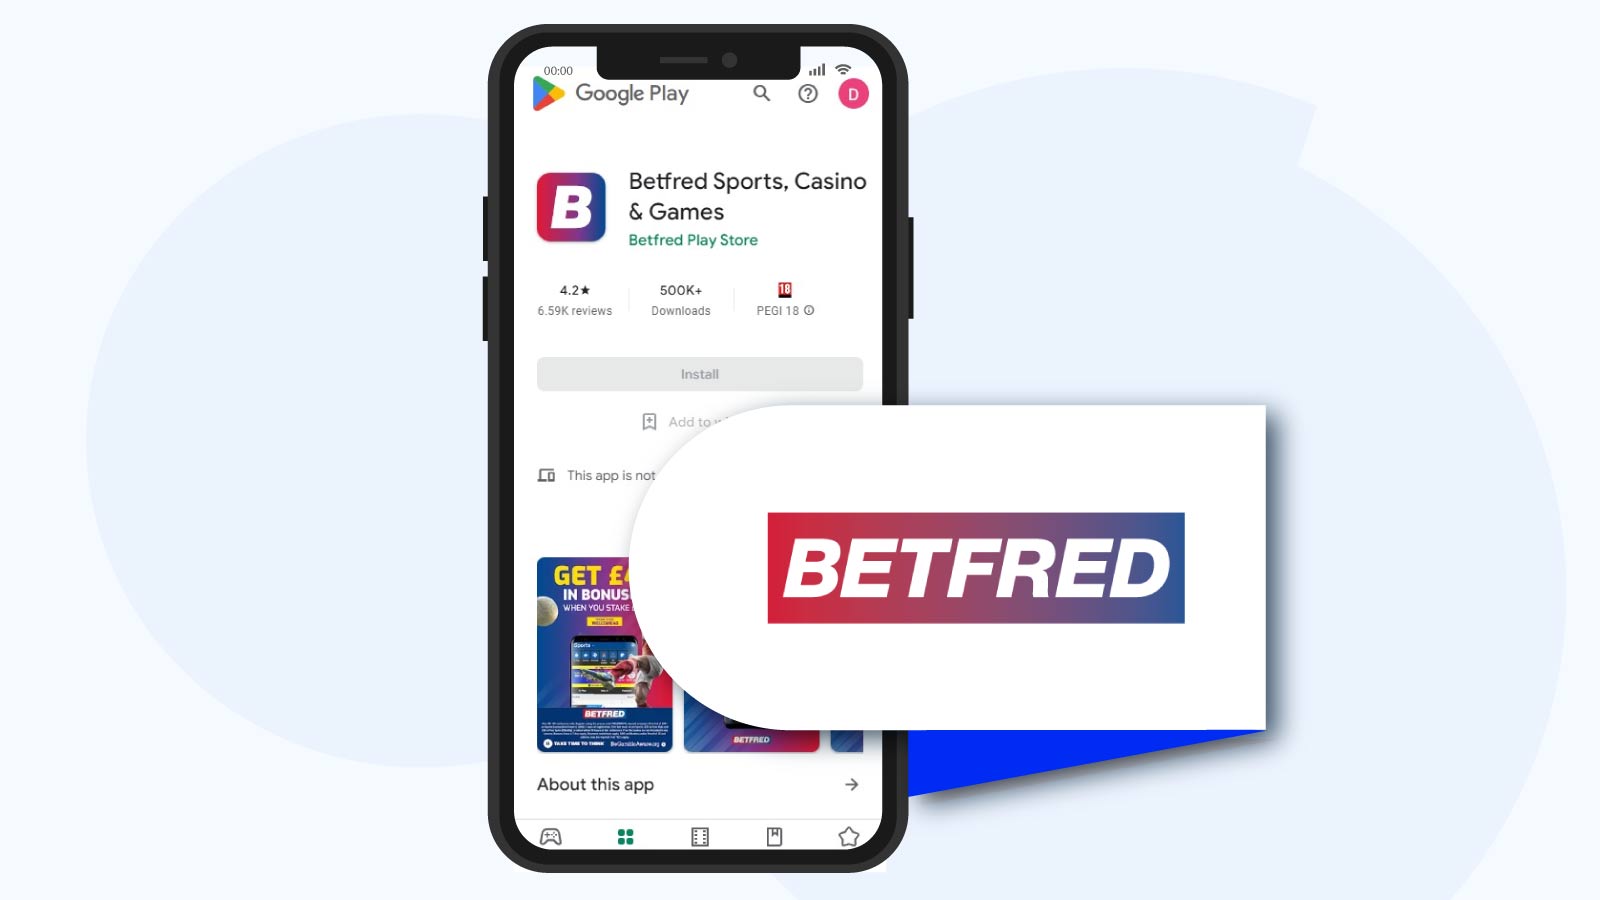 Betfred Best-casino-app-for-Android-players